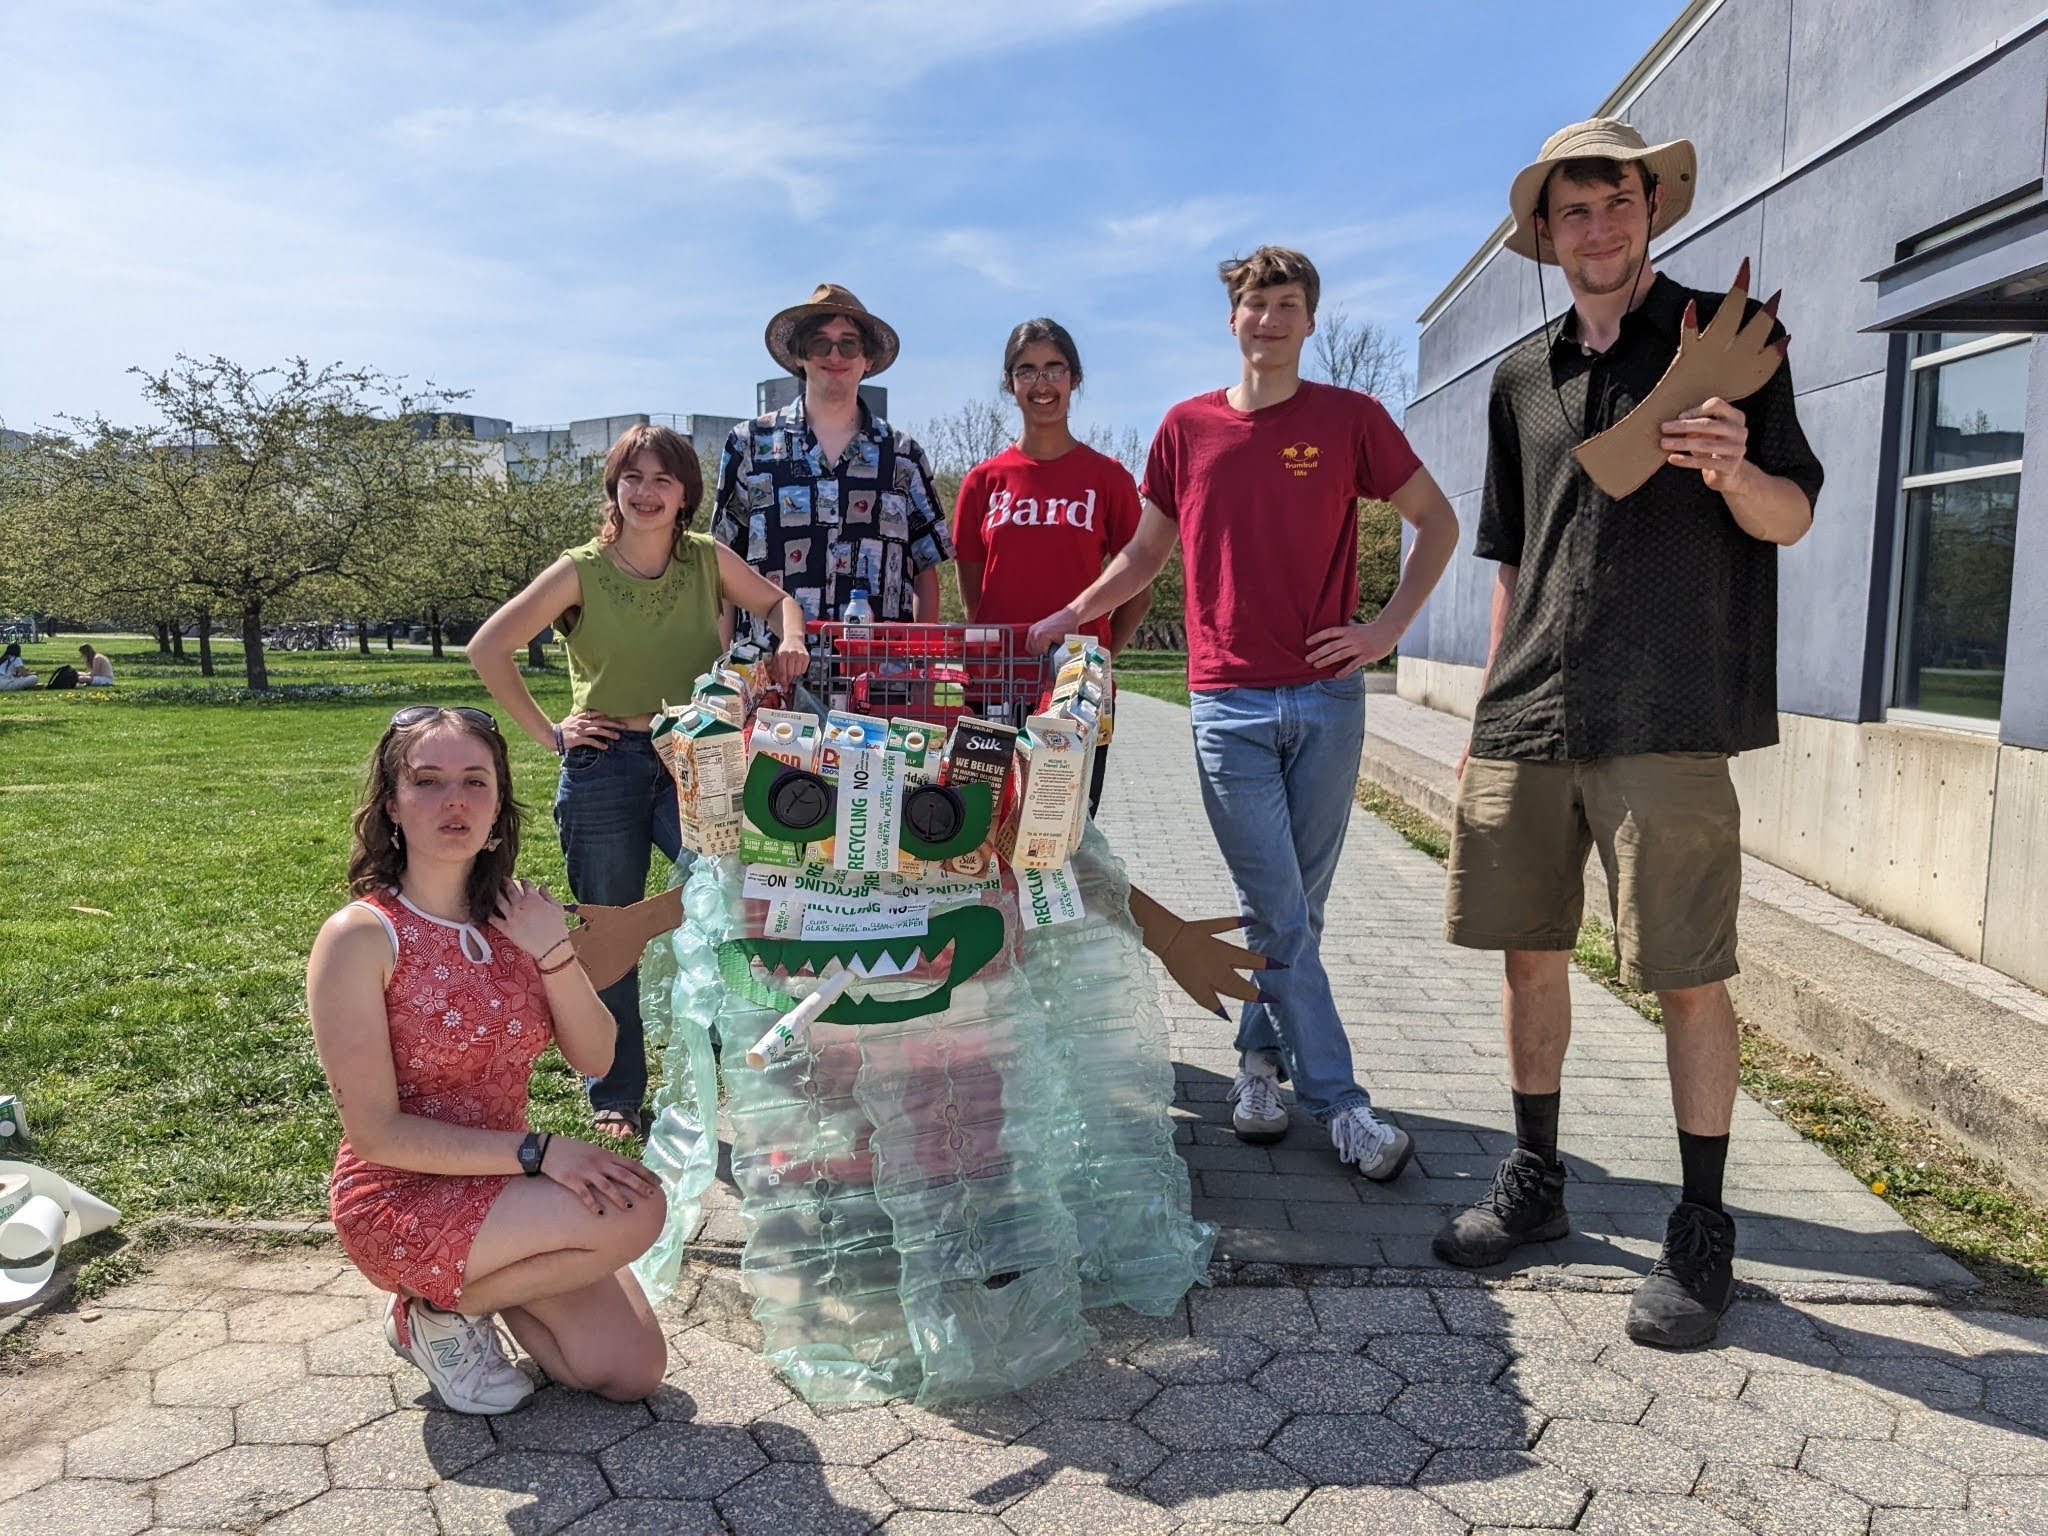 Six young people pose outside with a piece of art made from recycled materials. The art piece has eyes and pointy teeth.